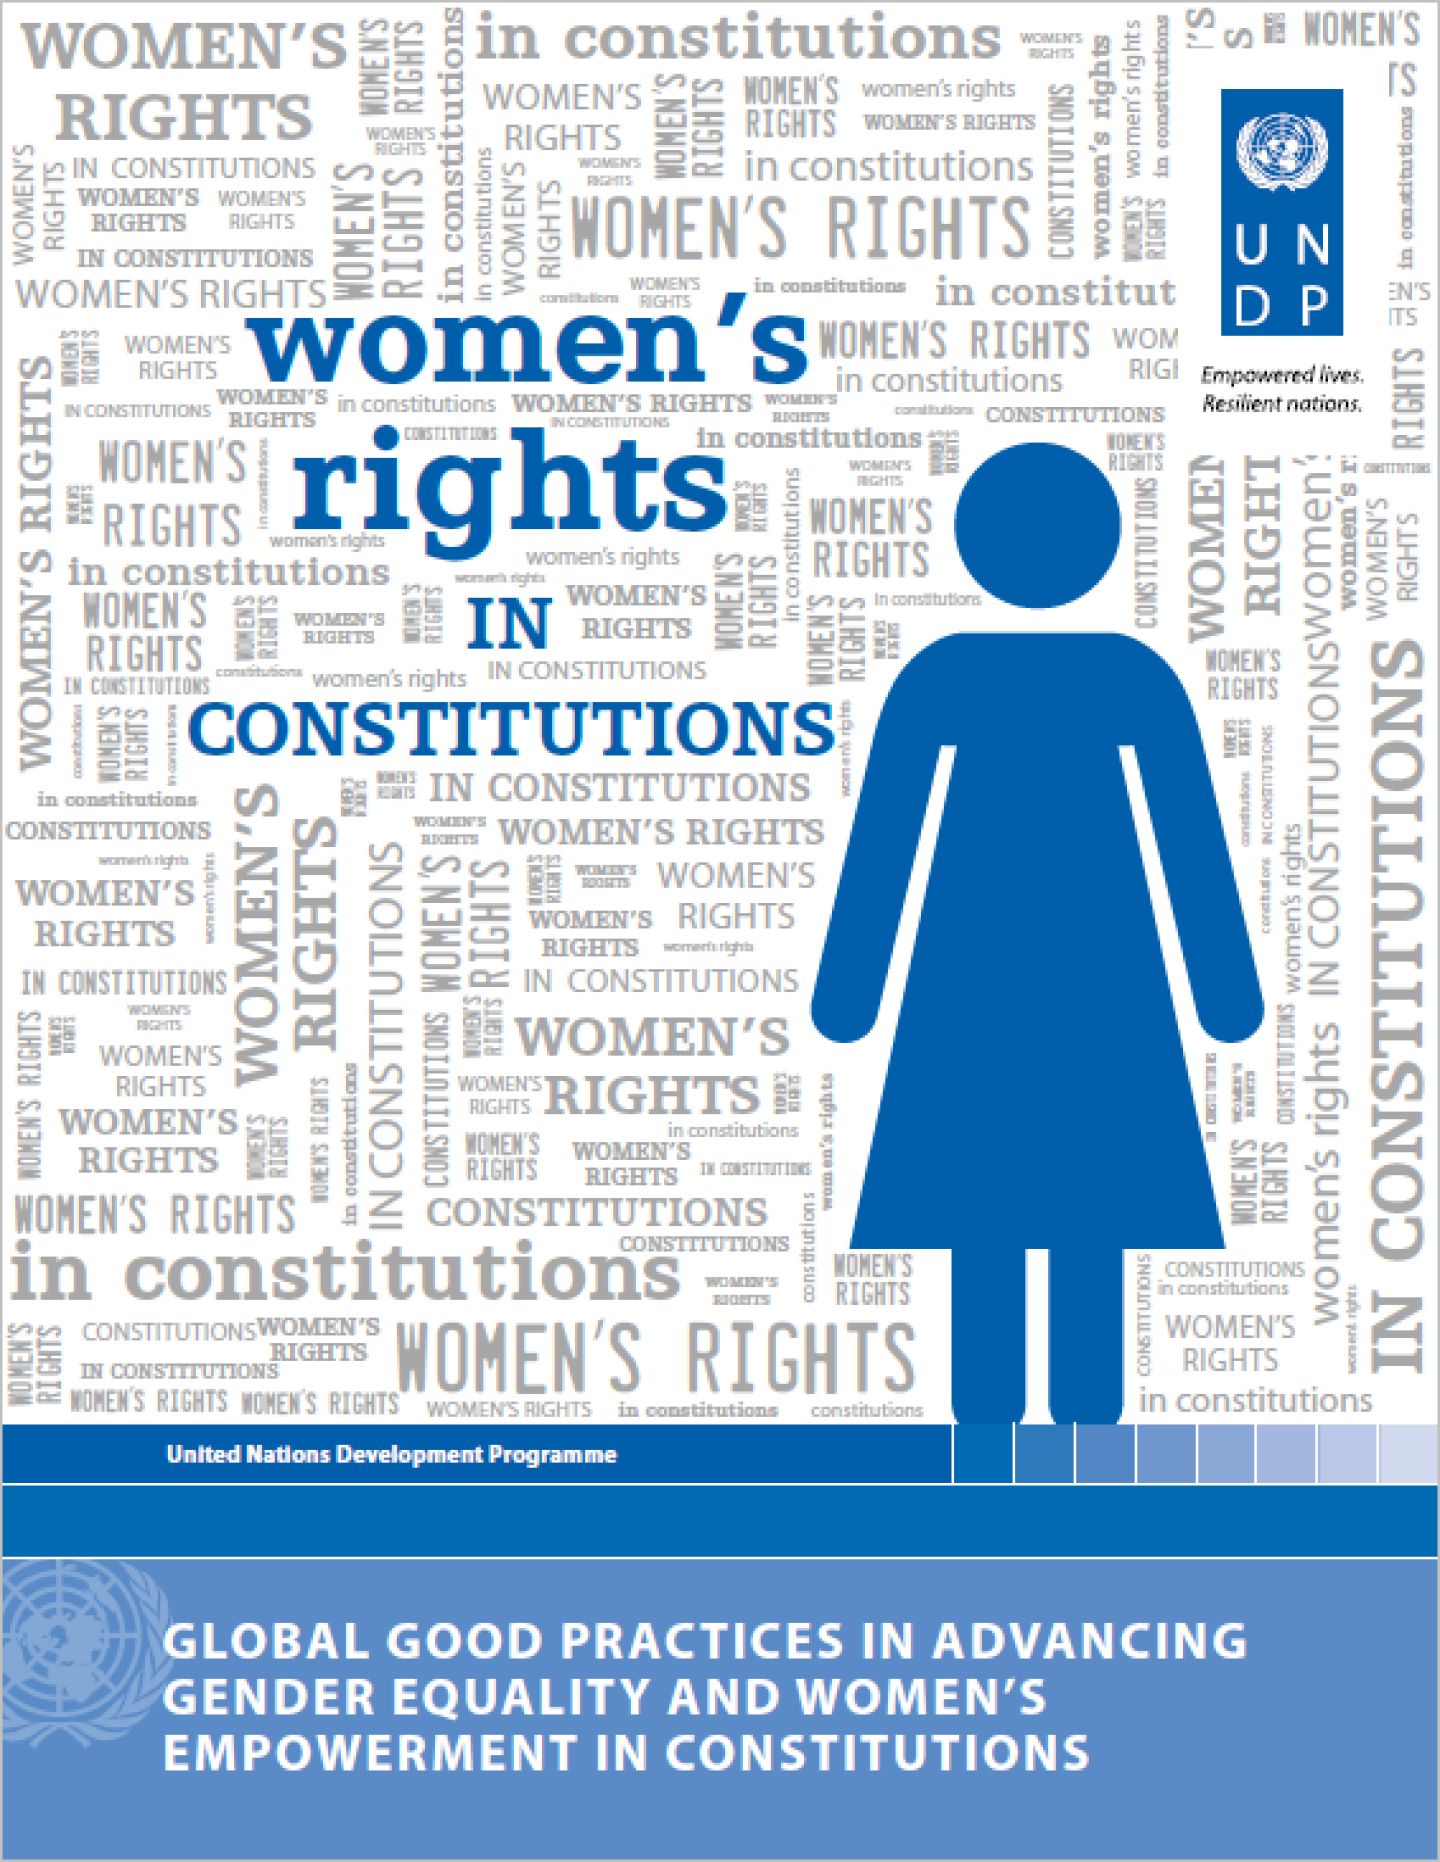 Global Good Practices in Advancing Gender Equality and Women's